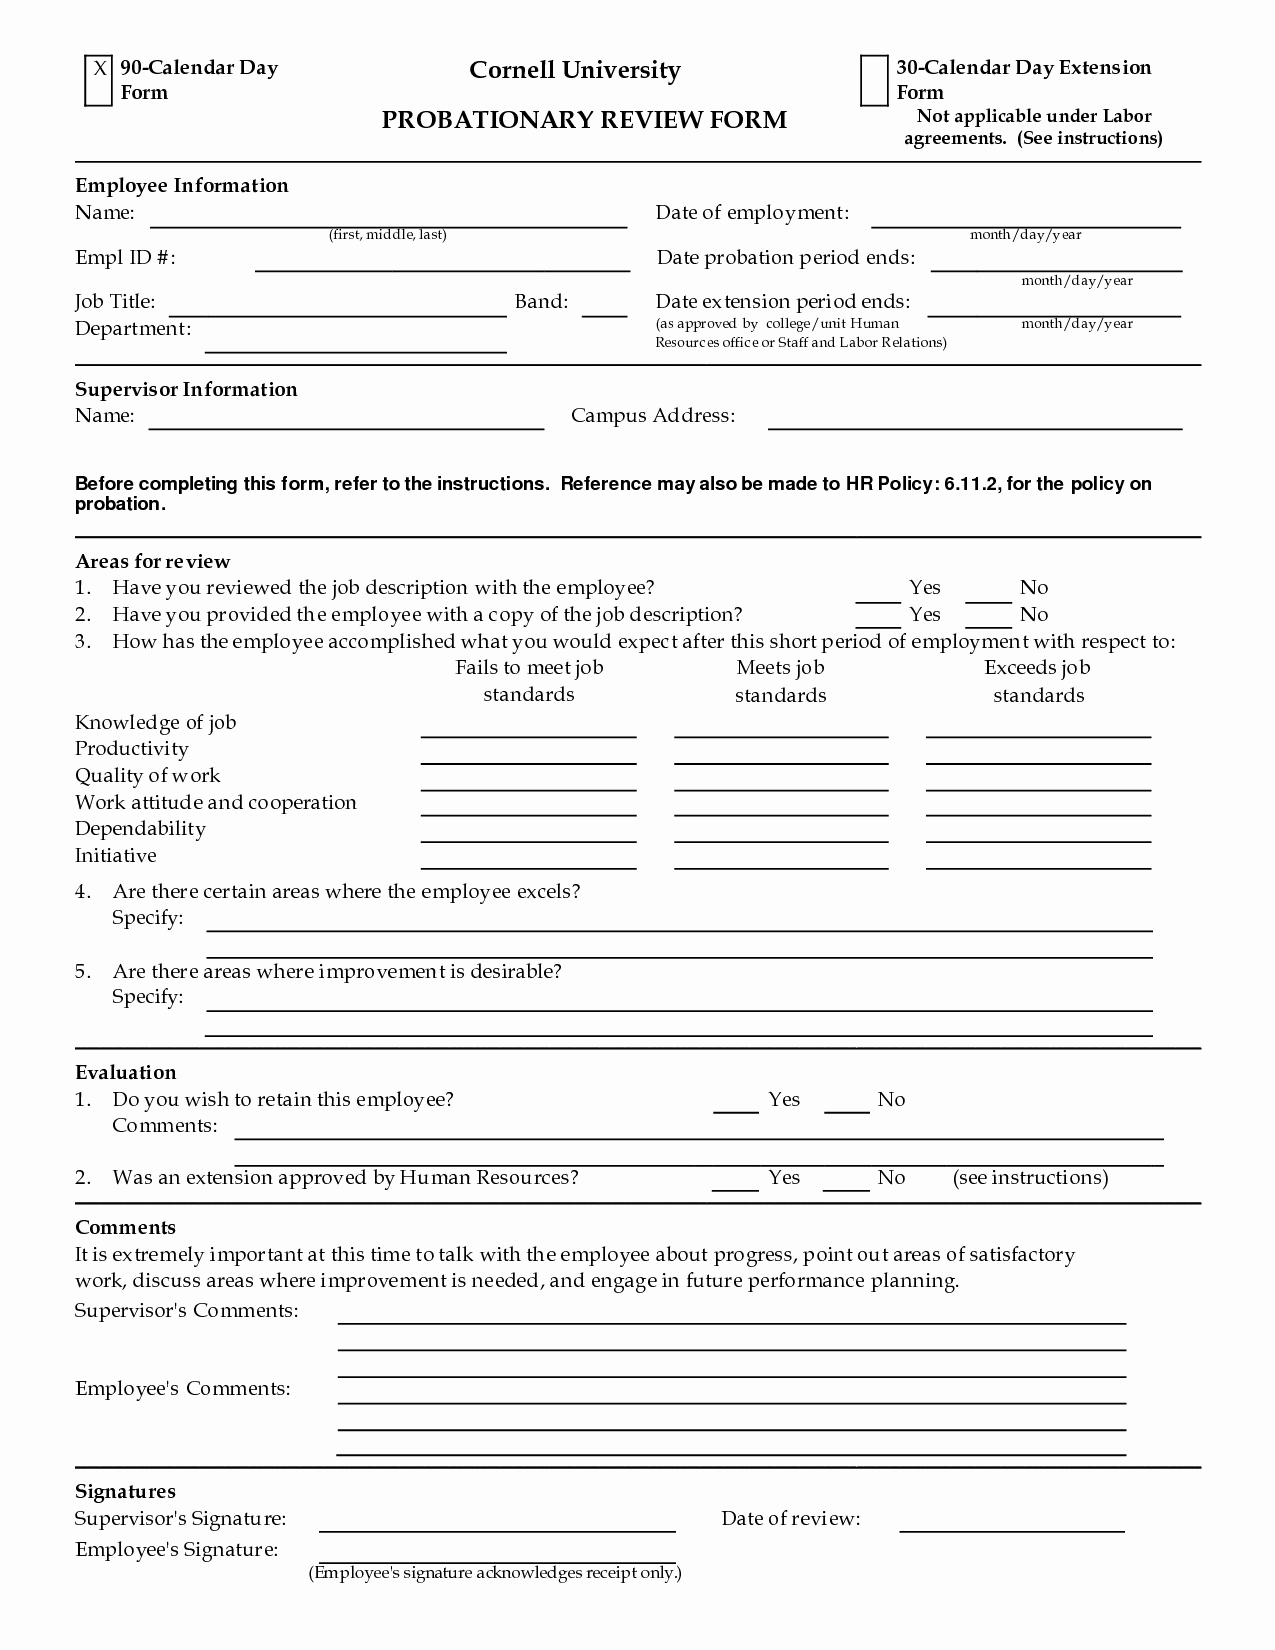 Best S Of 90 Day Probationary form 90 Day Employee